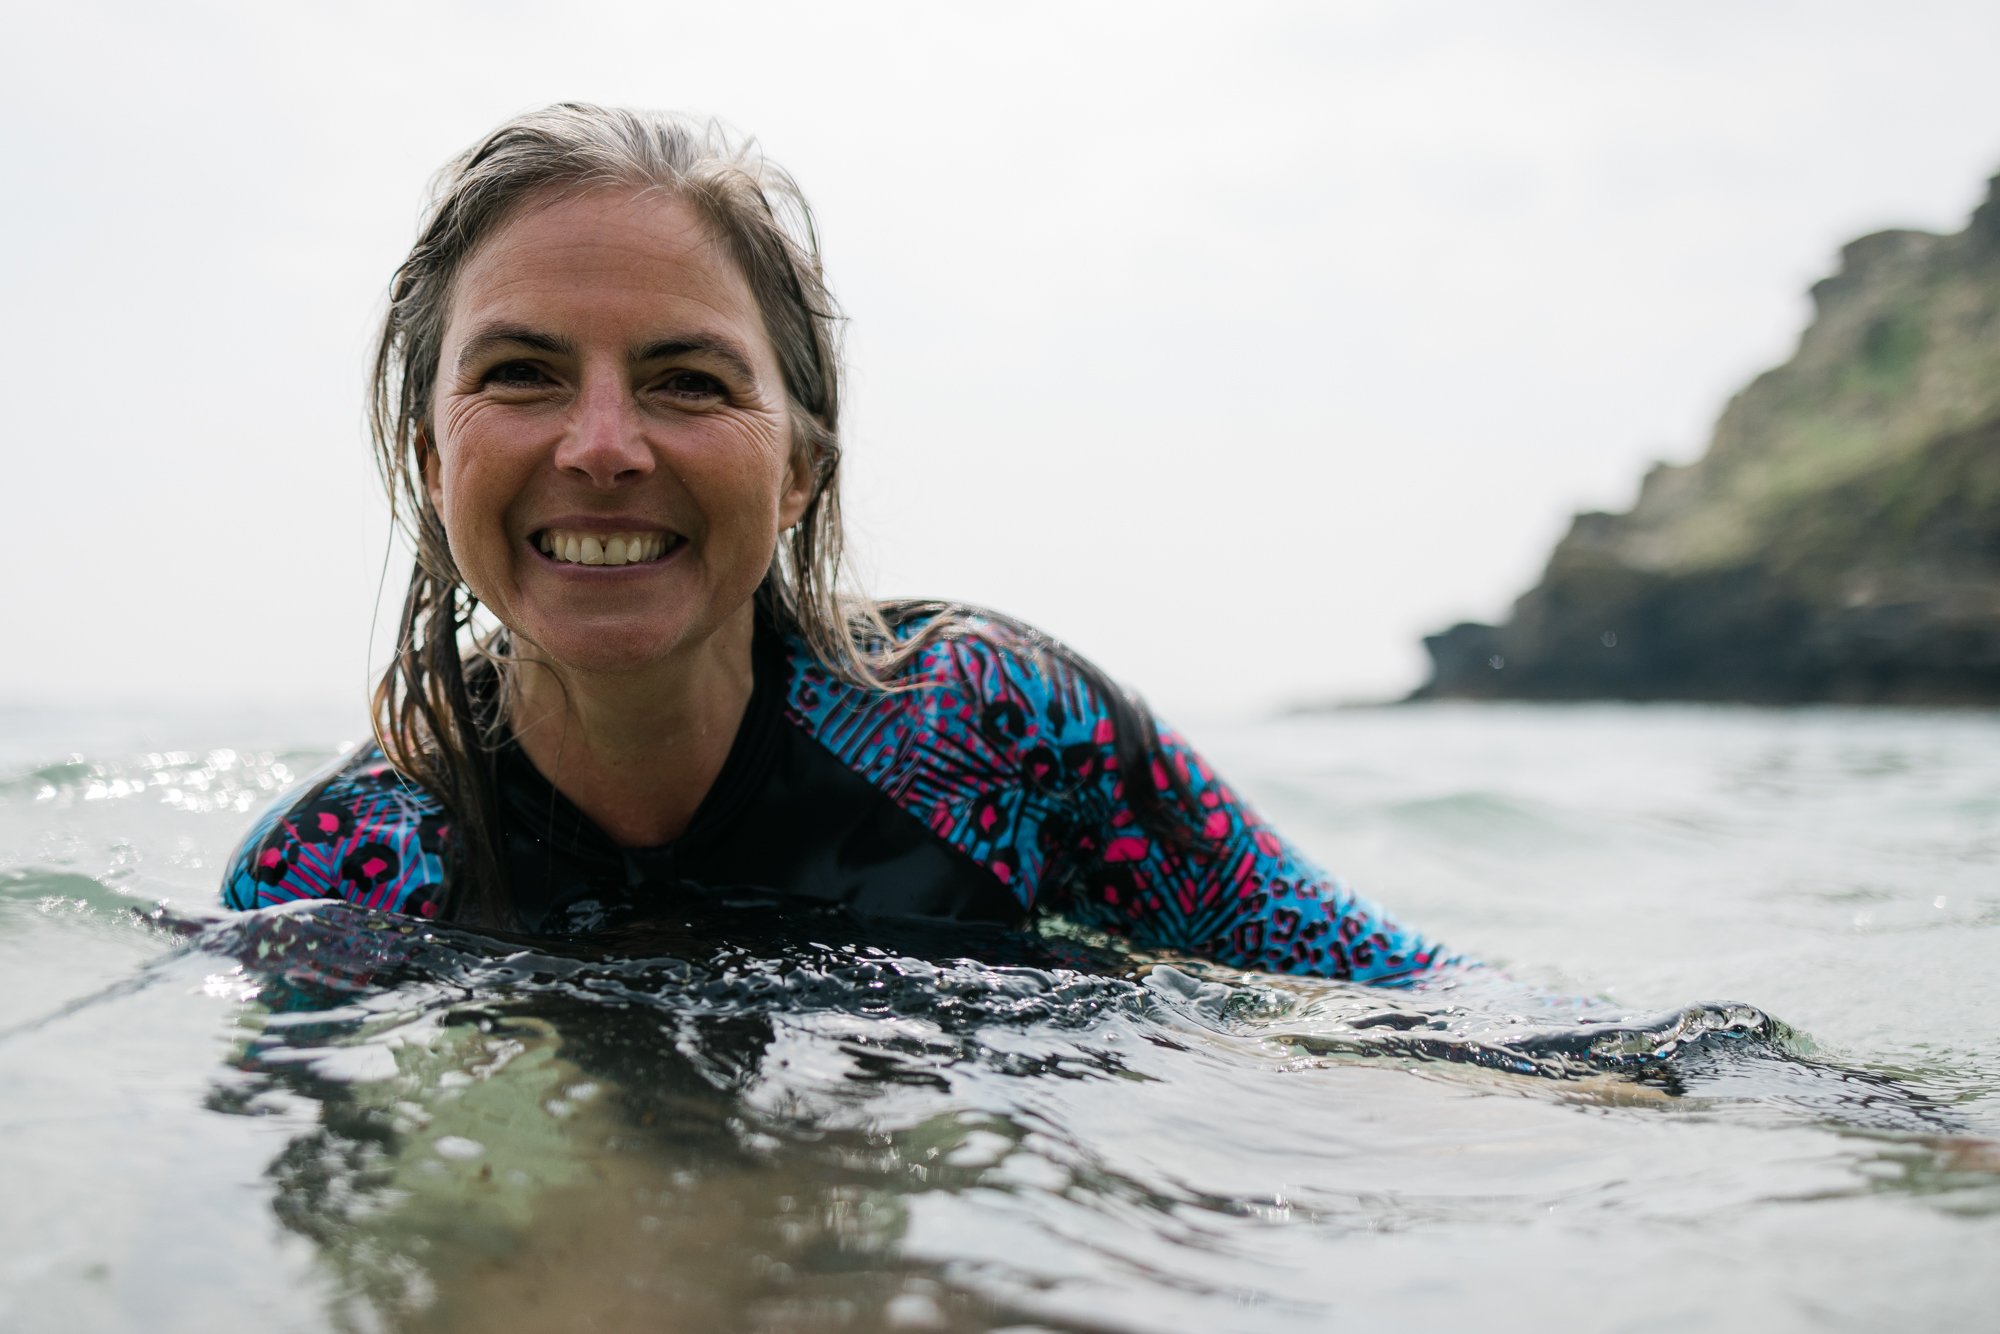 Pippa swims in the sea in Cornwall wearing Speedo wesuits